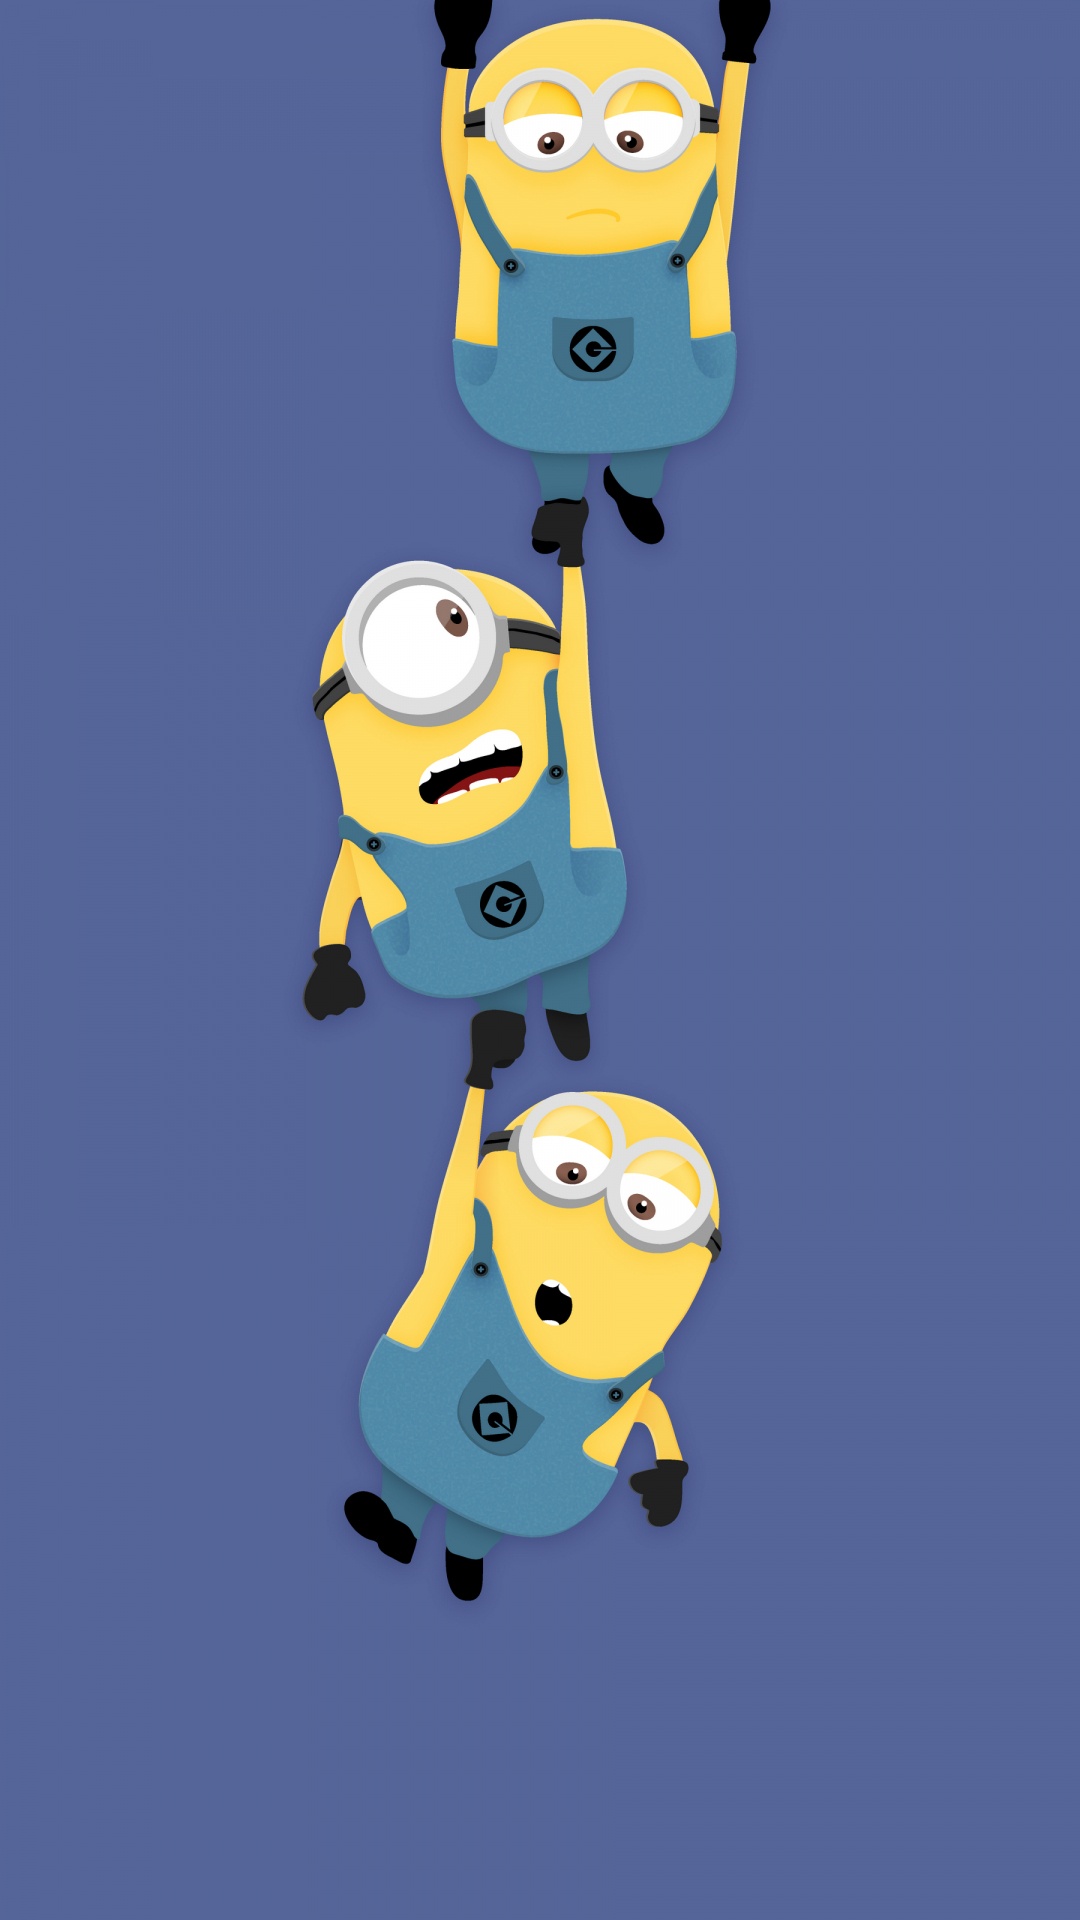 Cartoon, Minions, Coupon, Facial Expression, Gesture. Wallpaper in 1080x1920 Resolution